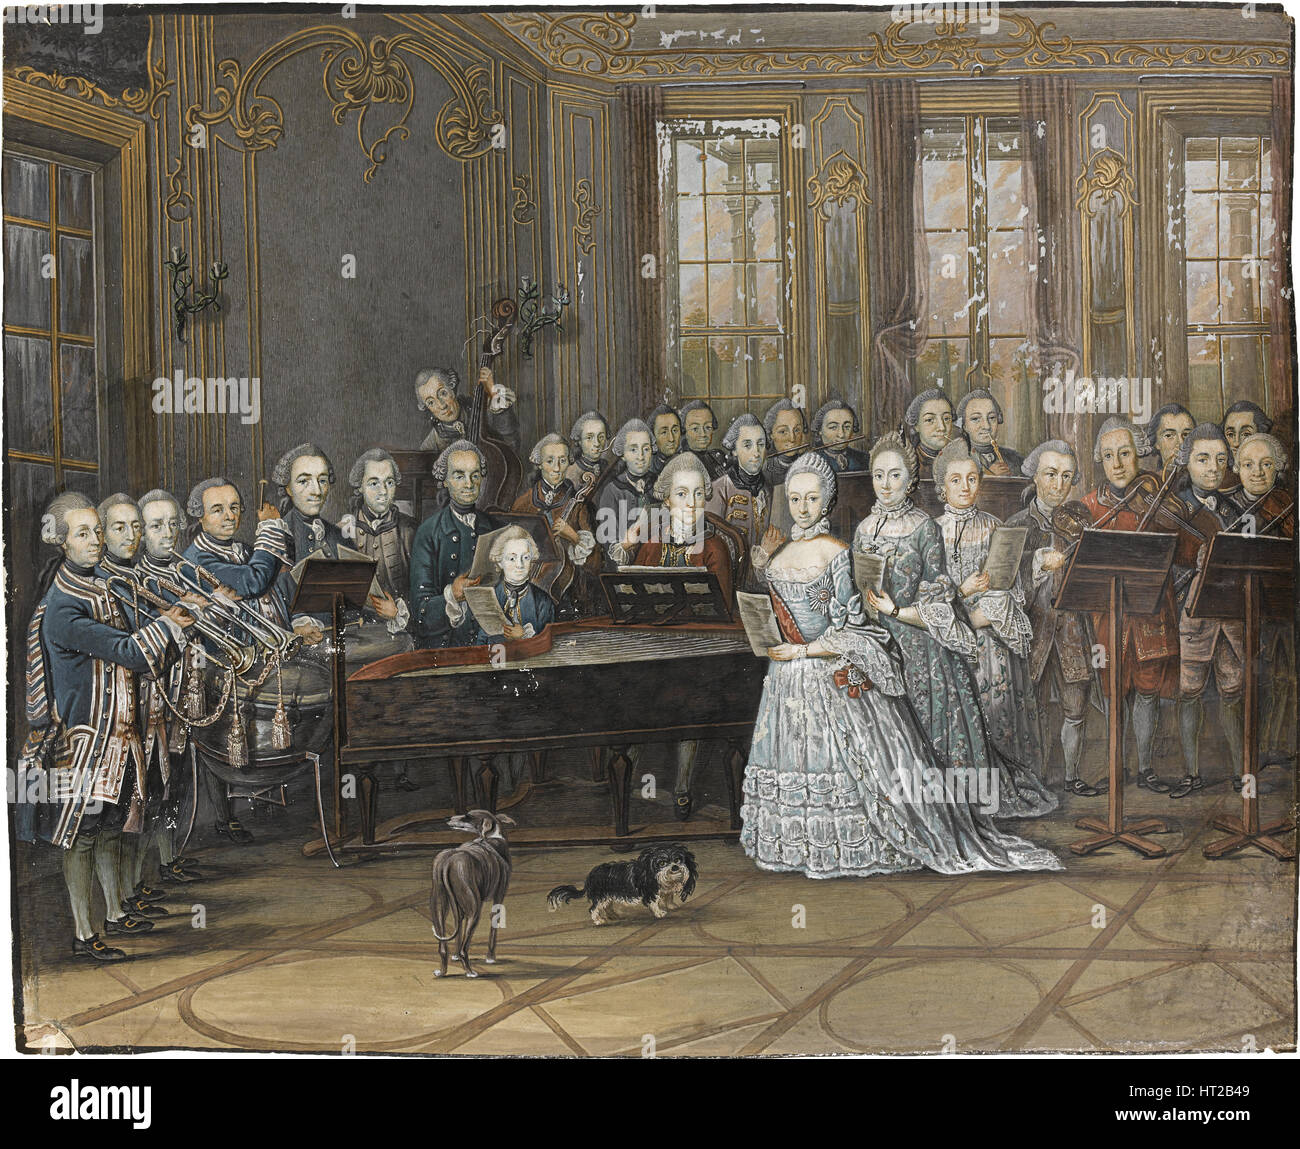 The chamber musicians in the Mecklenburg-Schwerin court chapel at Ludwigslust in 1770, 1770. Artist: Abel, Leopold August (1717-1794) Stock Photo